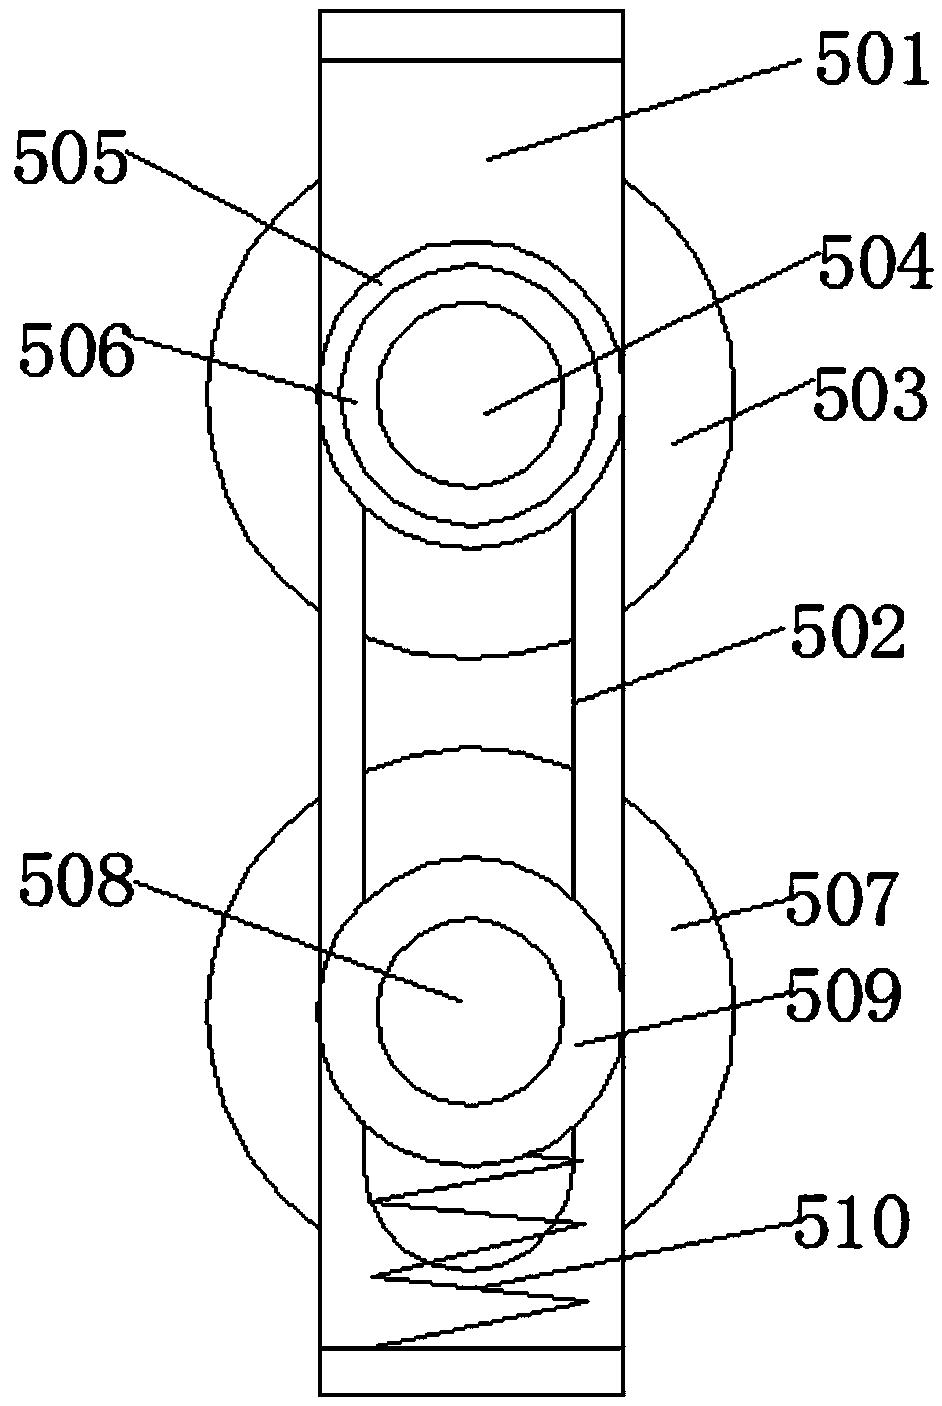 Segmenting device for manufacturing dried carrots